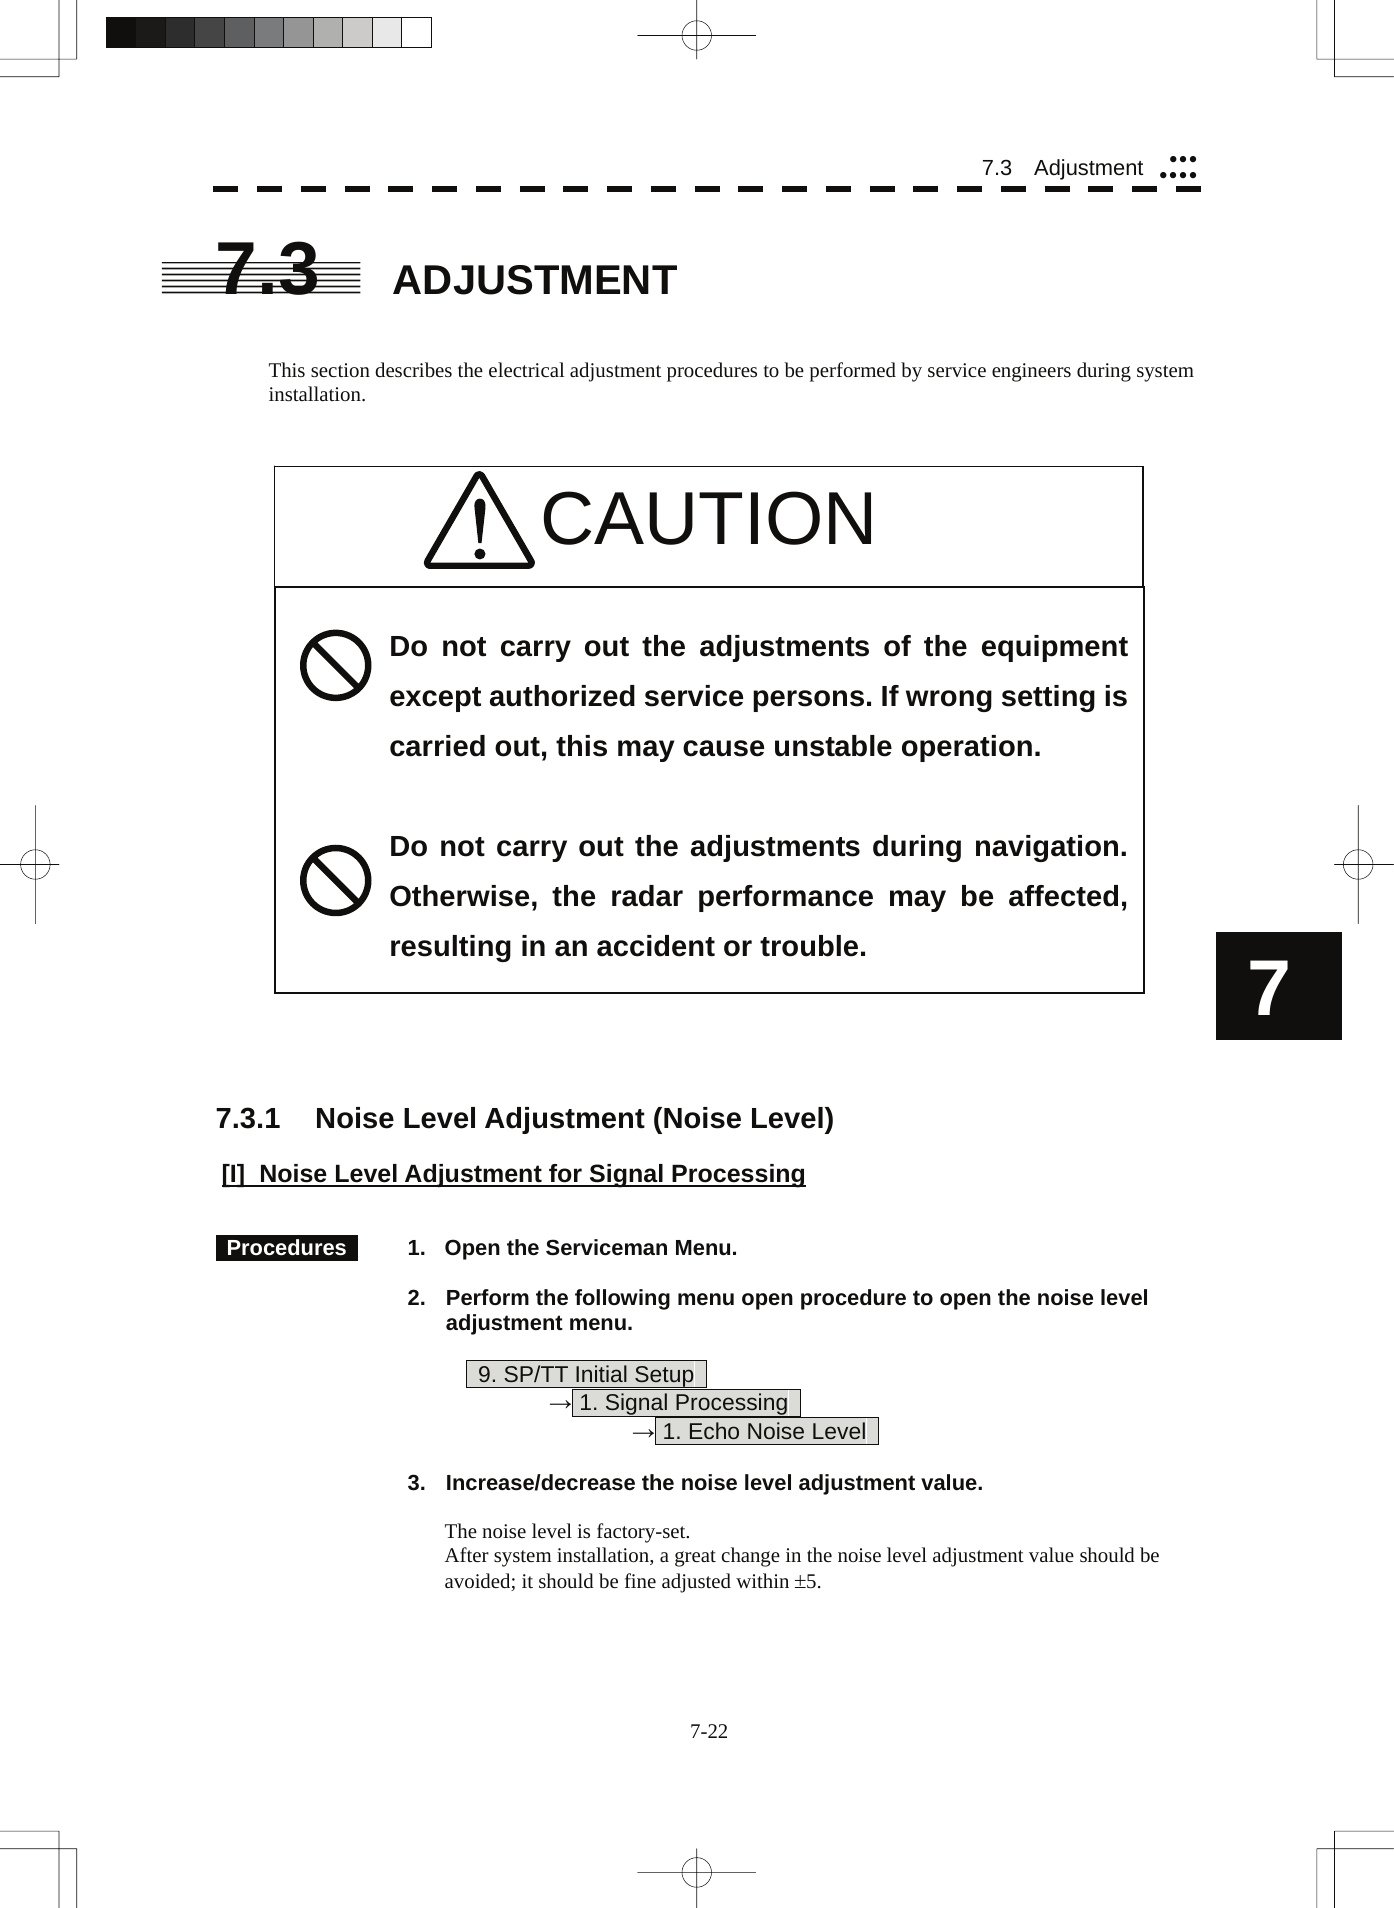  77.3  Adjustment yyyyyyy7.3 ADJUSTMENT   This section describes the electrical adjustment procedures to be performed by service engineers during system installation.    CAUTION                        Do not carry out the adjustments of the equipment except authorized service persons. If wrong setting is carried out, this may cause unstable operation.  Do not carry out the adjustments during navigation. Otherwise, the radar performance may be affected, resulting in an accident or trouble.     7.3.1  Noise Level Adjustment (Noise Level)  [I] Noise Level Adjustment for Signal Processing    Procedures    1.  Open the Serviceman Menu.  2.  Perform the following menu open procedure to open the noise level adjustment menu.          9. SP/TT Initial Setup       → 1. Signal Processing        → 1. Echo Noise Level    3.  Increase/decrease the noise level adjustment value.  The noise level is factory-set. After system installation, a great change in the noise level adjustment value should be avoided; it should be fine adjusted within ±5. 7-22 